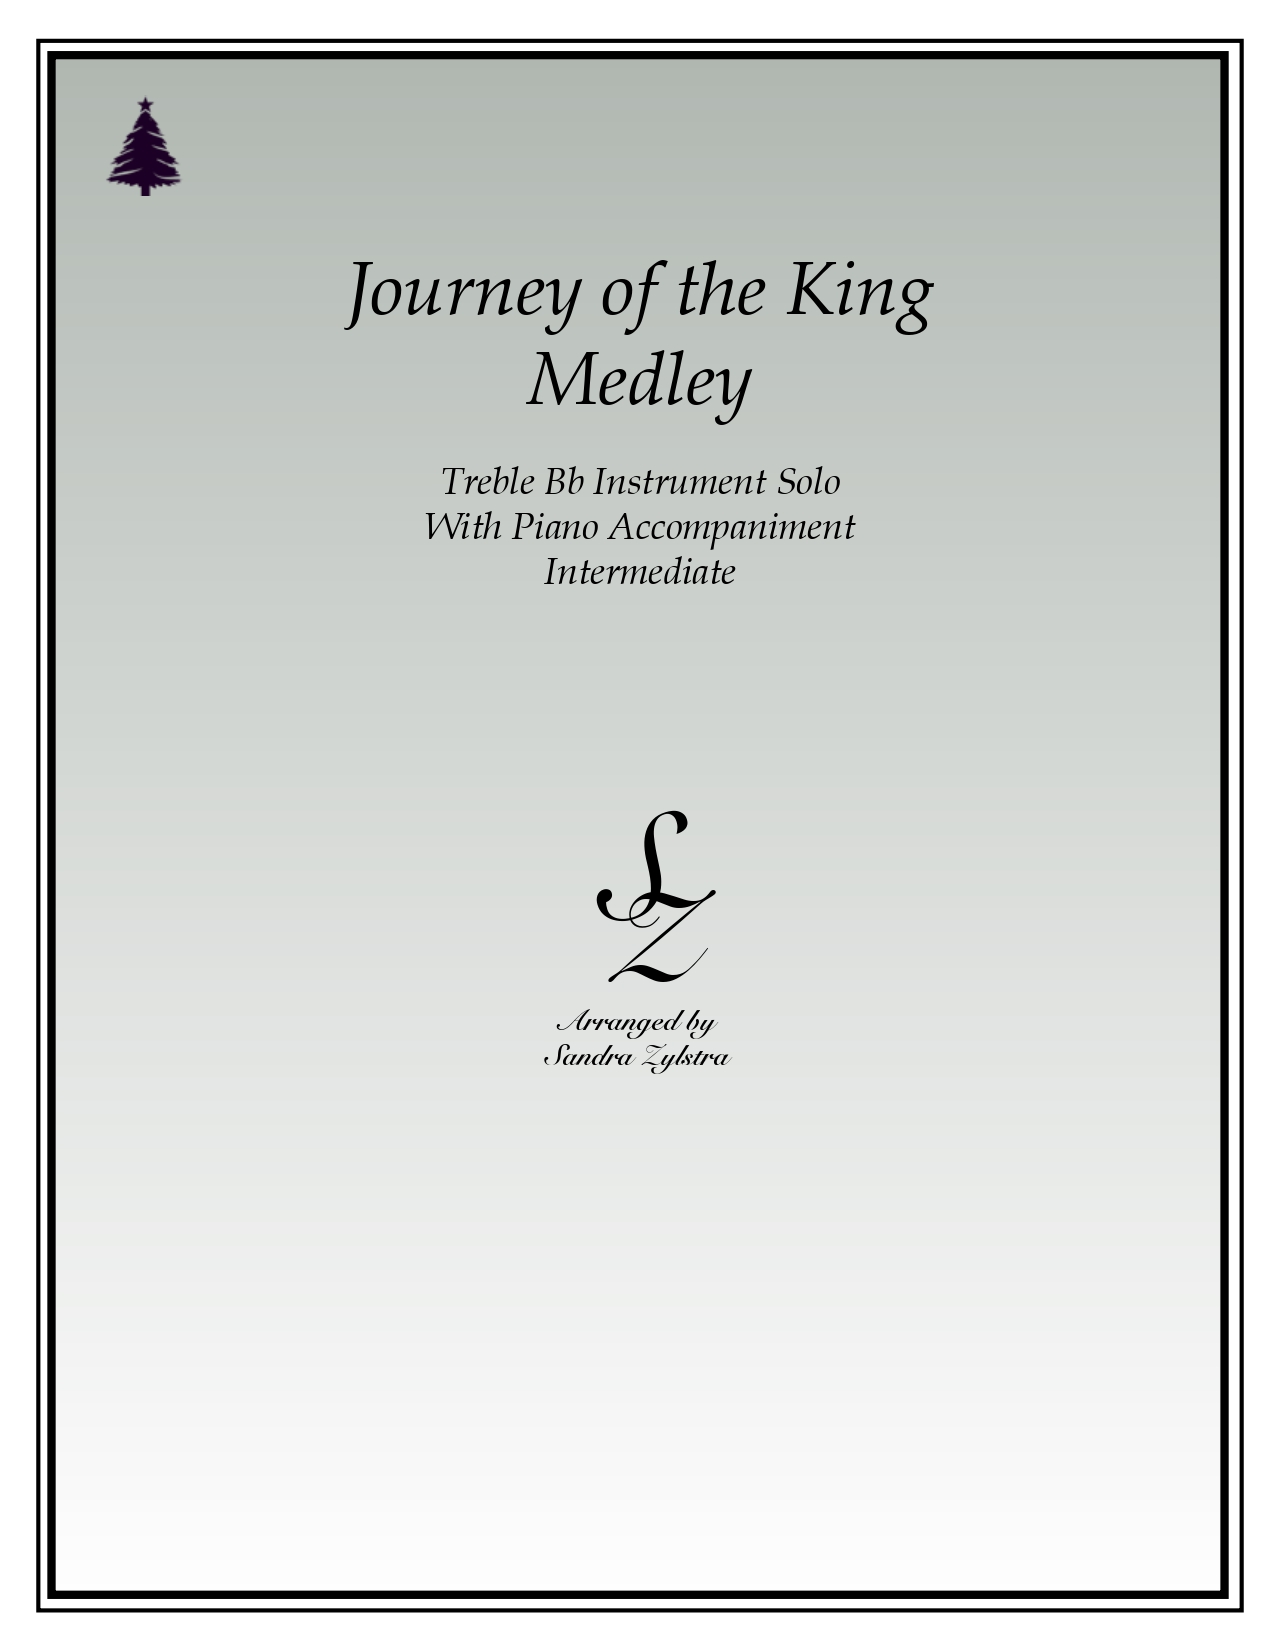 Journey Of The King Medley Bb instrument solo part cover page 00011